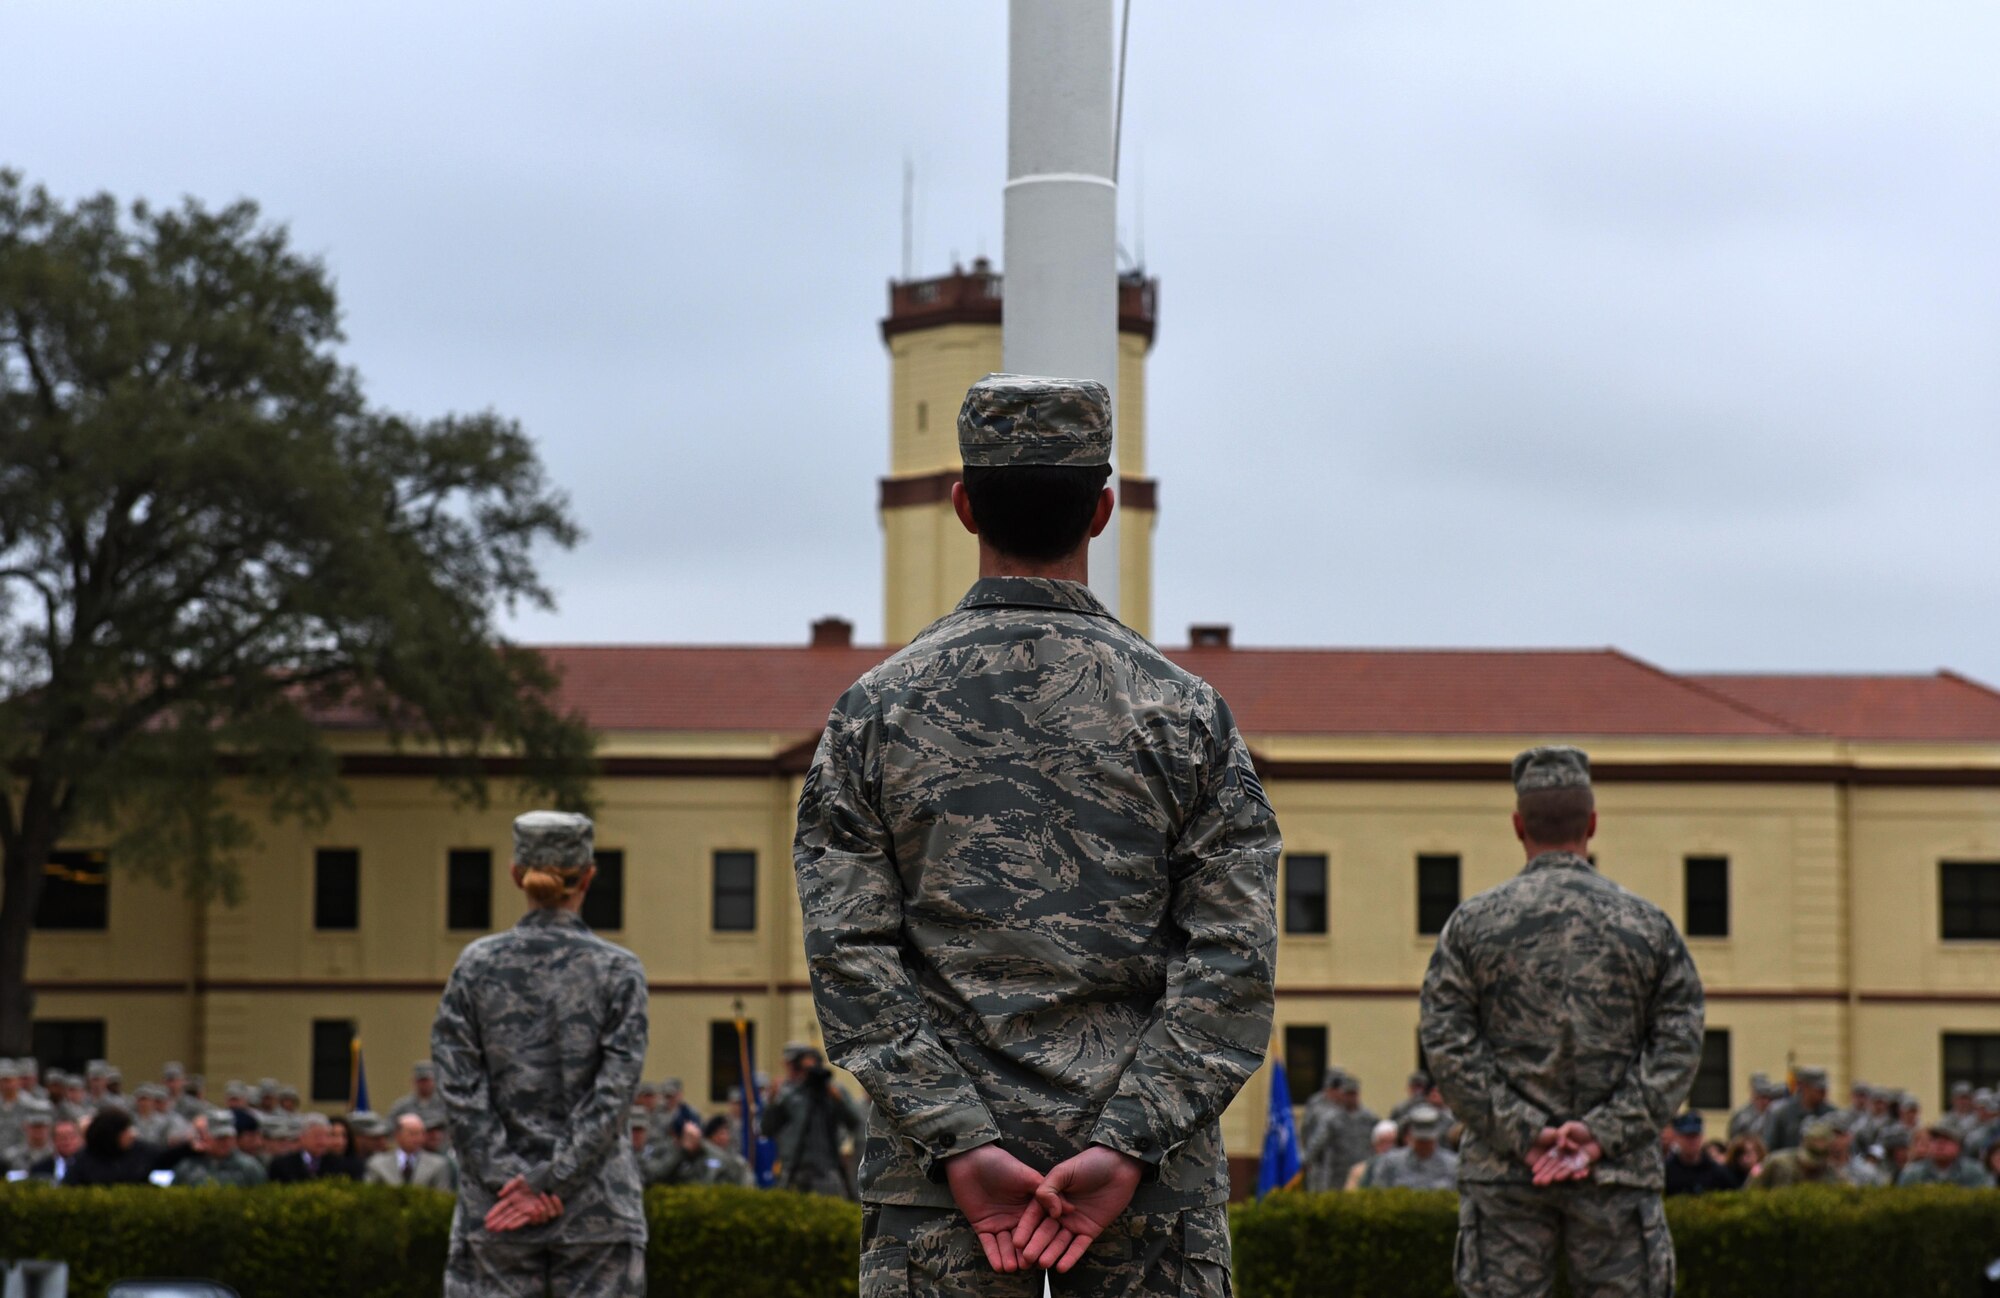 Bomber Airmen from across the country gather around the 2nd Bomb Wing flag pole for a retreat ceremony at Barksdale Air Force Base, La., Feb. 2, 2016. U.S. Air Force Maj. Gen. Thomas Bussiere, 8th Air Force commander, spoke at the retreat ceremony, which was followed by an in-trail formation of a B-1, B-2 and B-52 bomber flyover. The flyover took place as part of the 8th Air Force’s 75th anniversary events. (U.S. Air Force photo by Senior Airman Erin Trower)